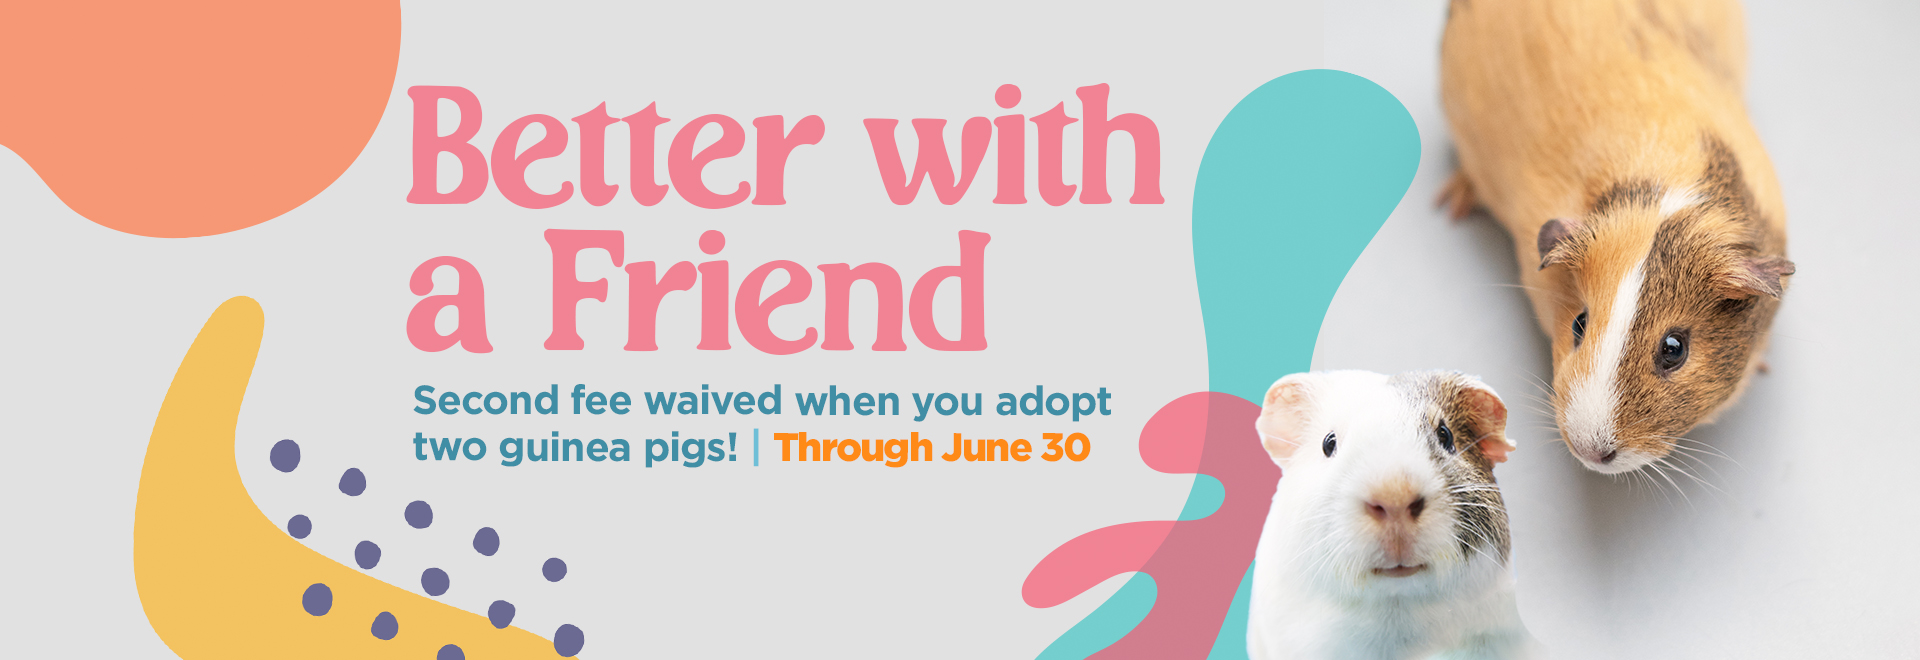 Better with a Friend | Second fee waived when you adopt two guinea pigs! Through June 30